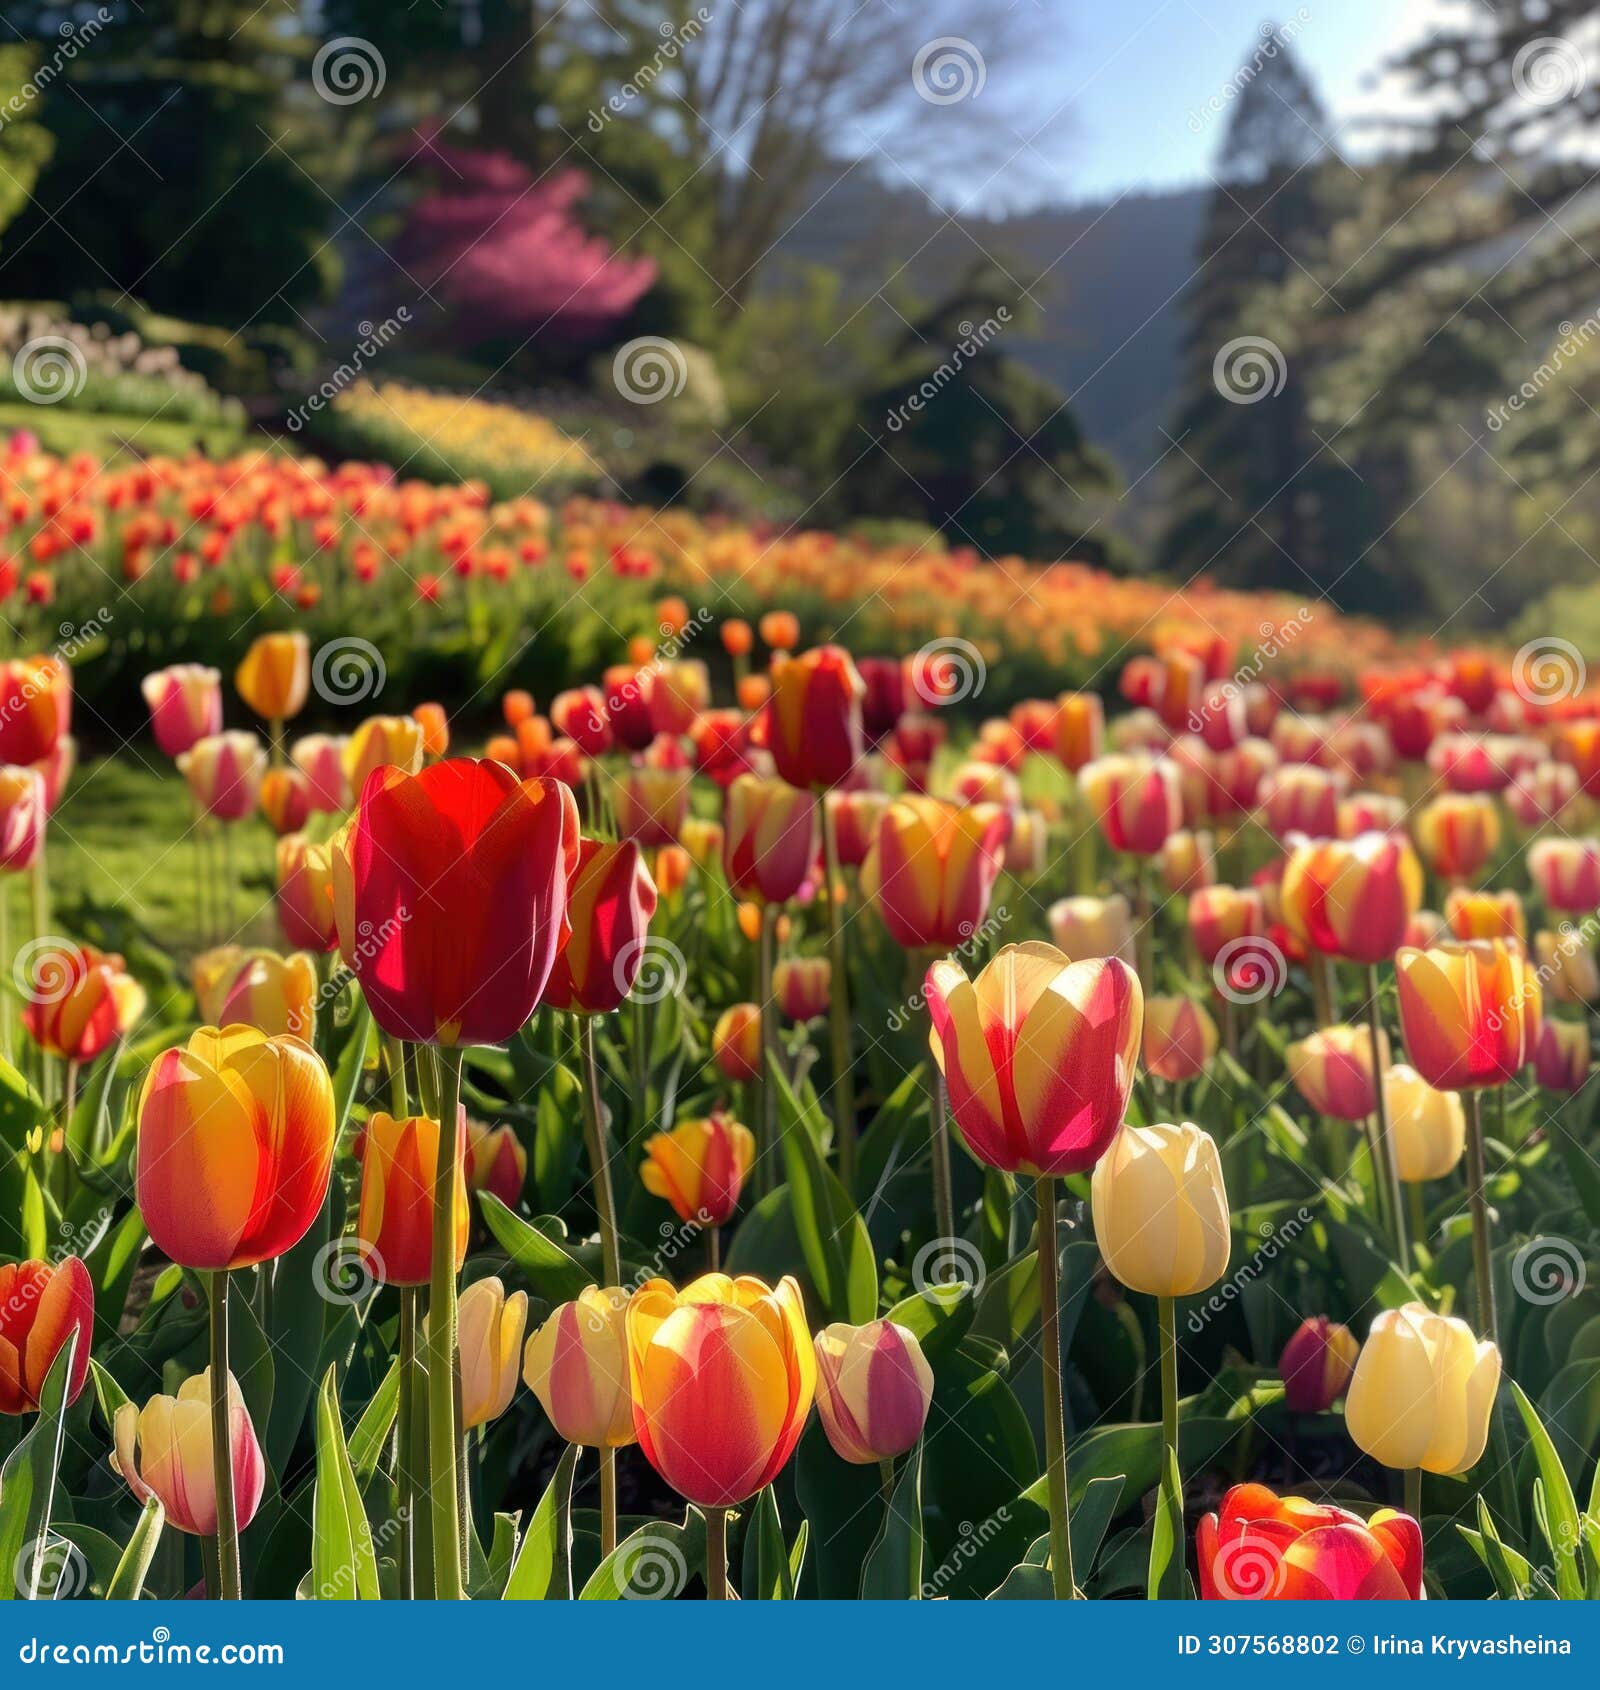 a picturesque hillside blanketed in colorful tulips radiates the essence of springtime exuberance